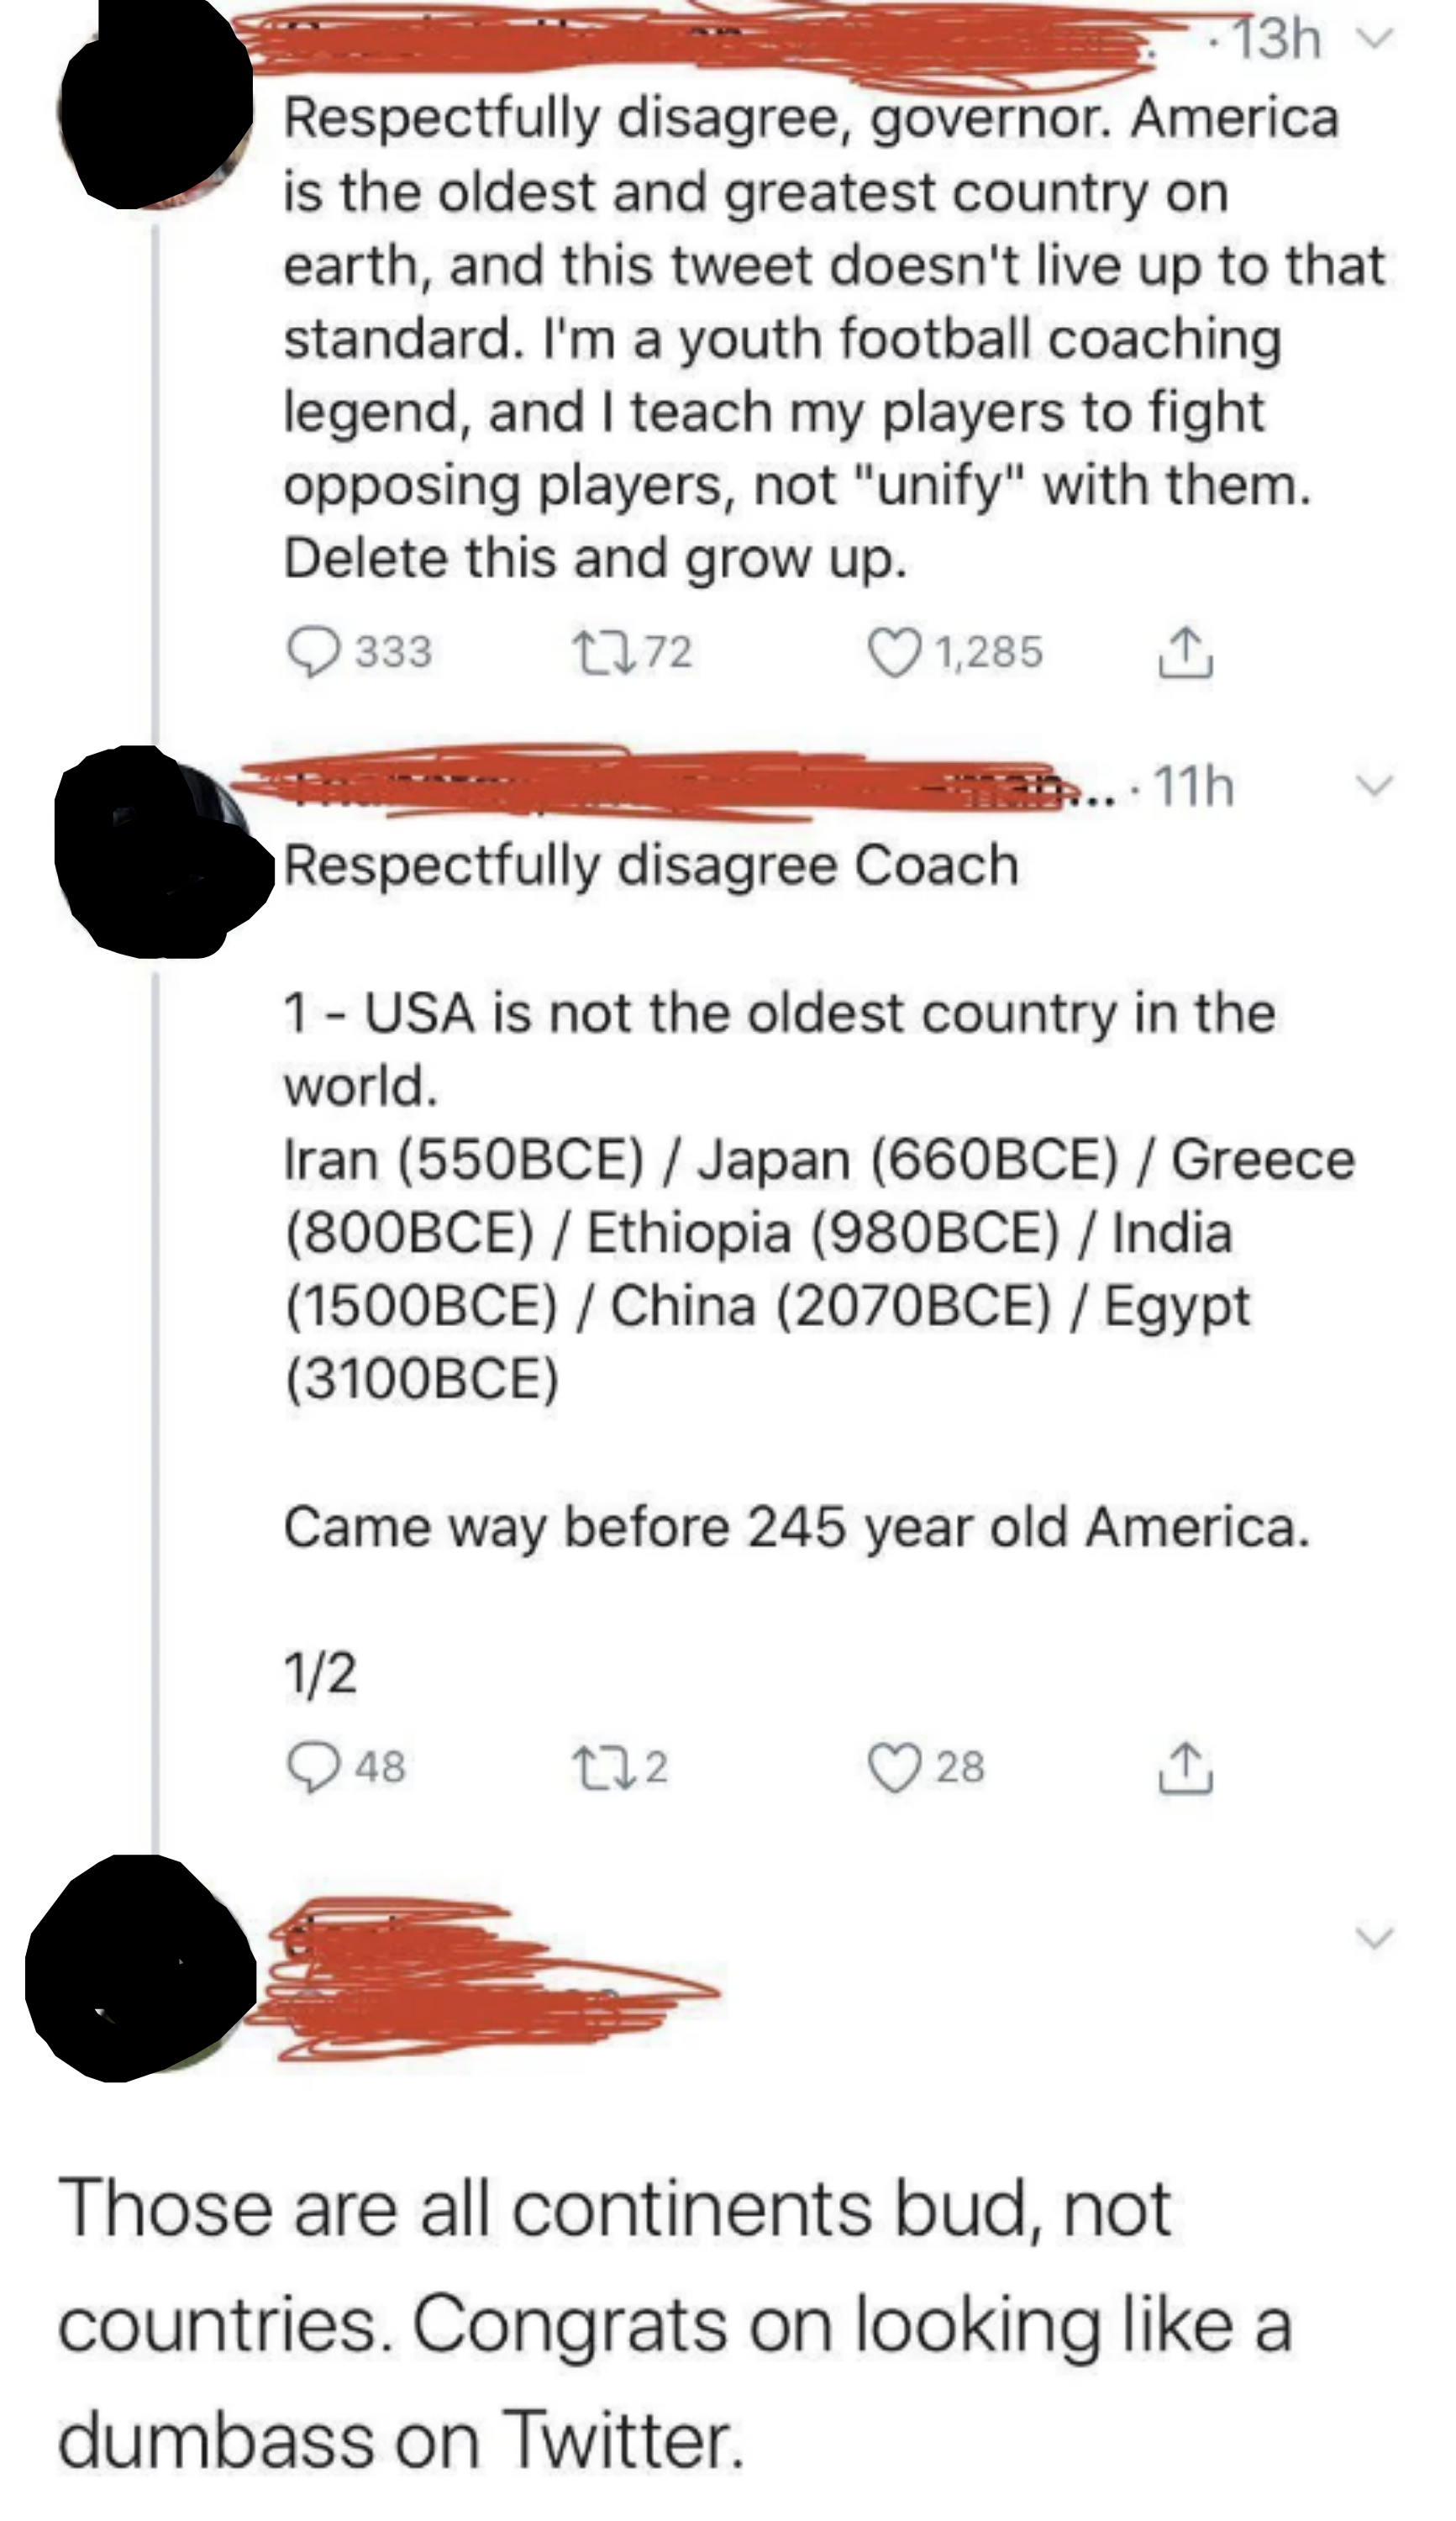 person provides list of oldest countries and another says, those are all continents bud, not countries, congrats on looking like a dumbass on twitter